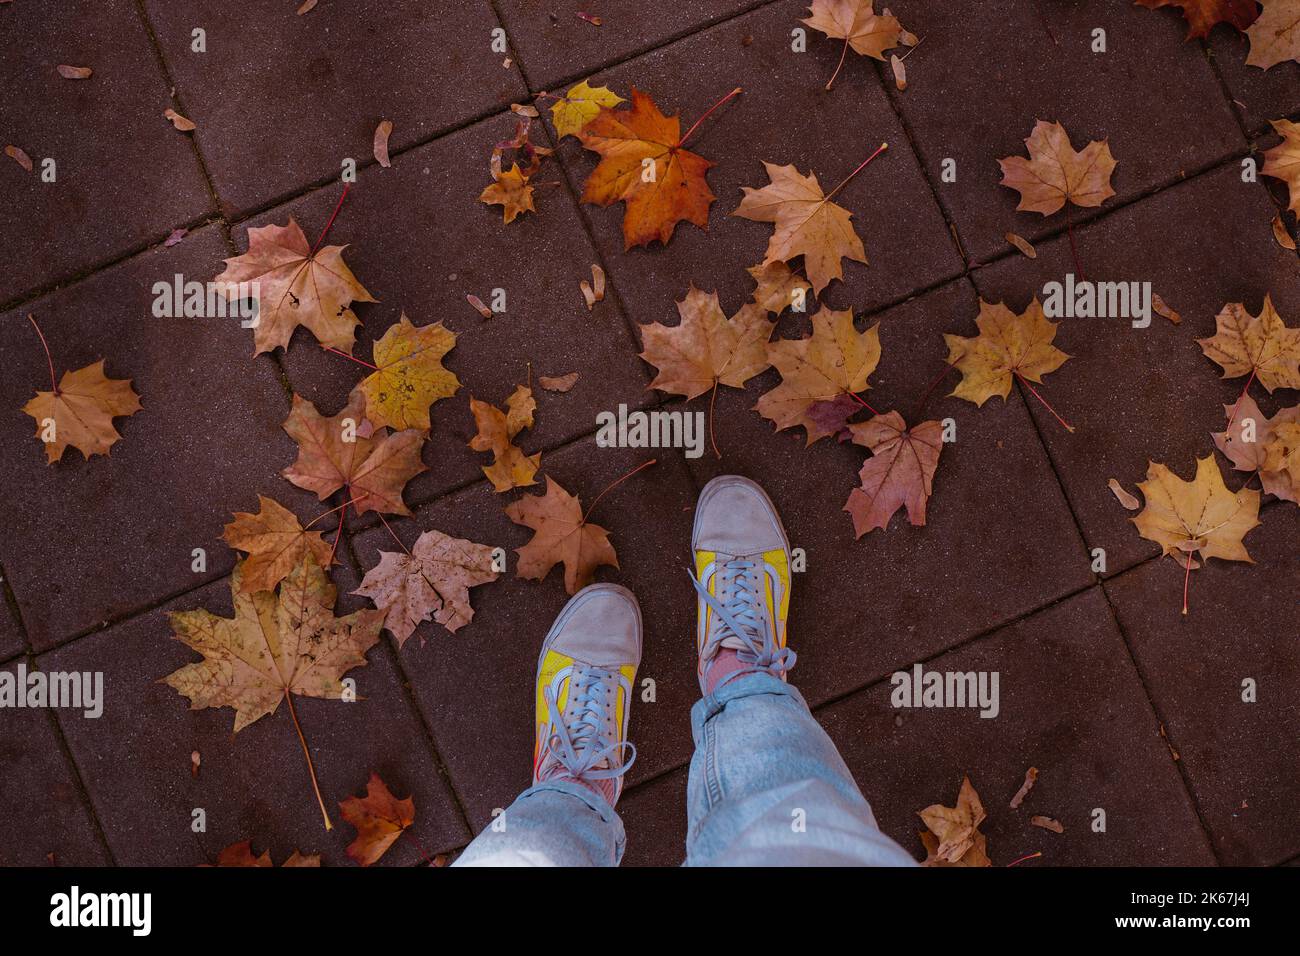 autumn walk in a city in sneakers Stock Photo